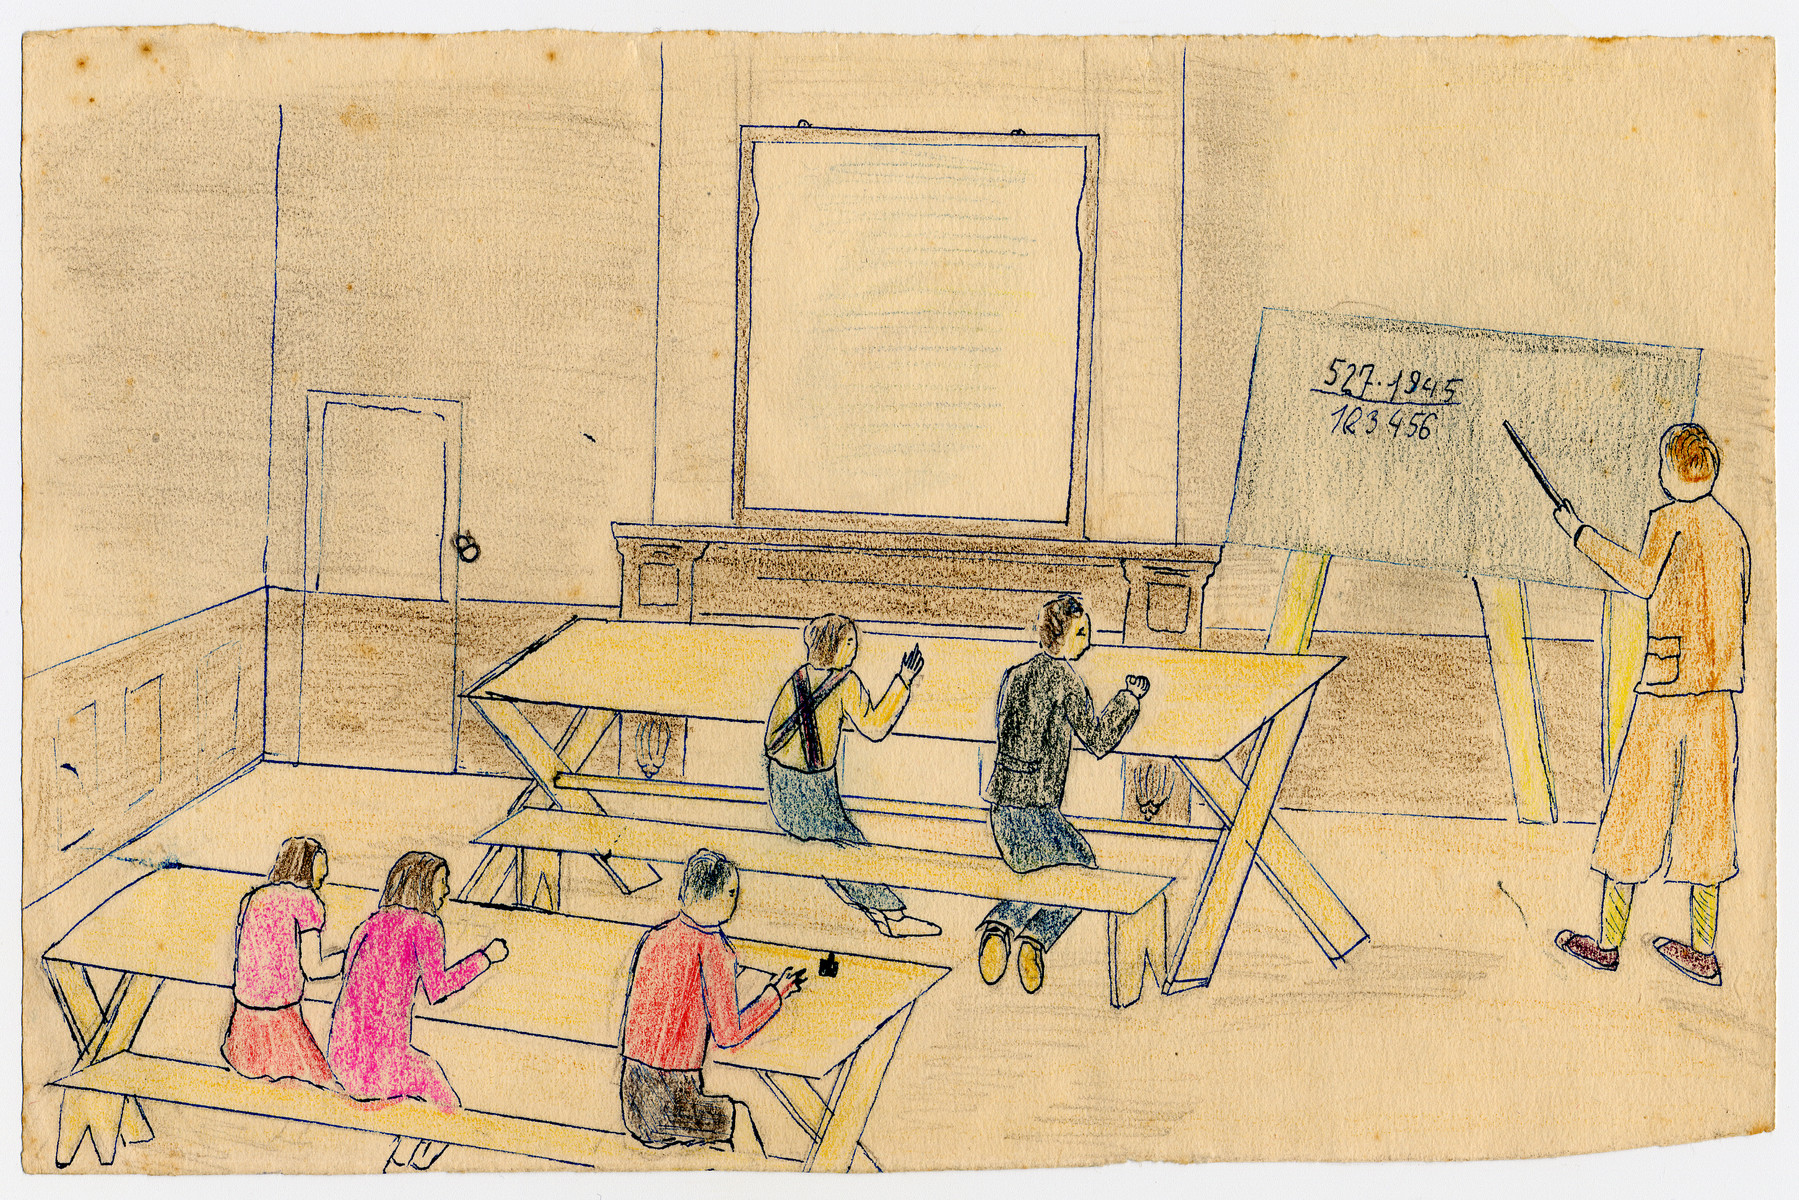 Color child's drawing of a schoolroom drawn by a child in Chateau de la Hille.